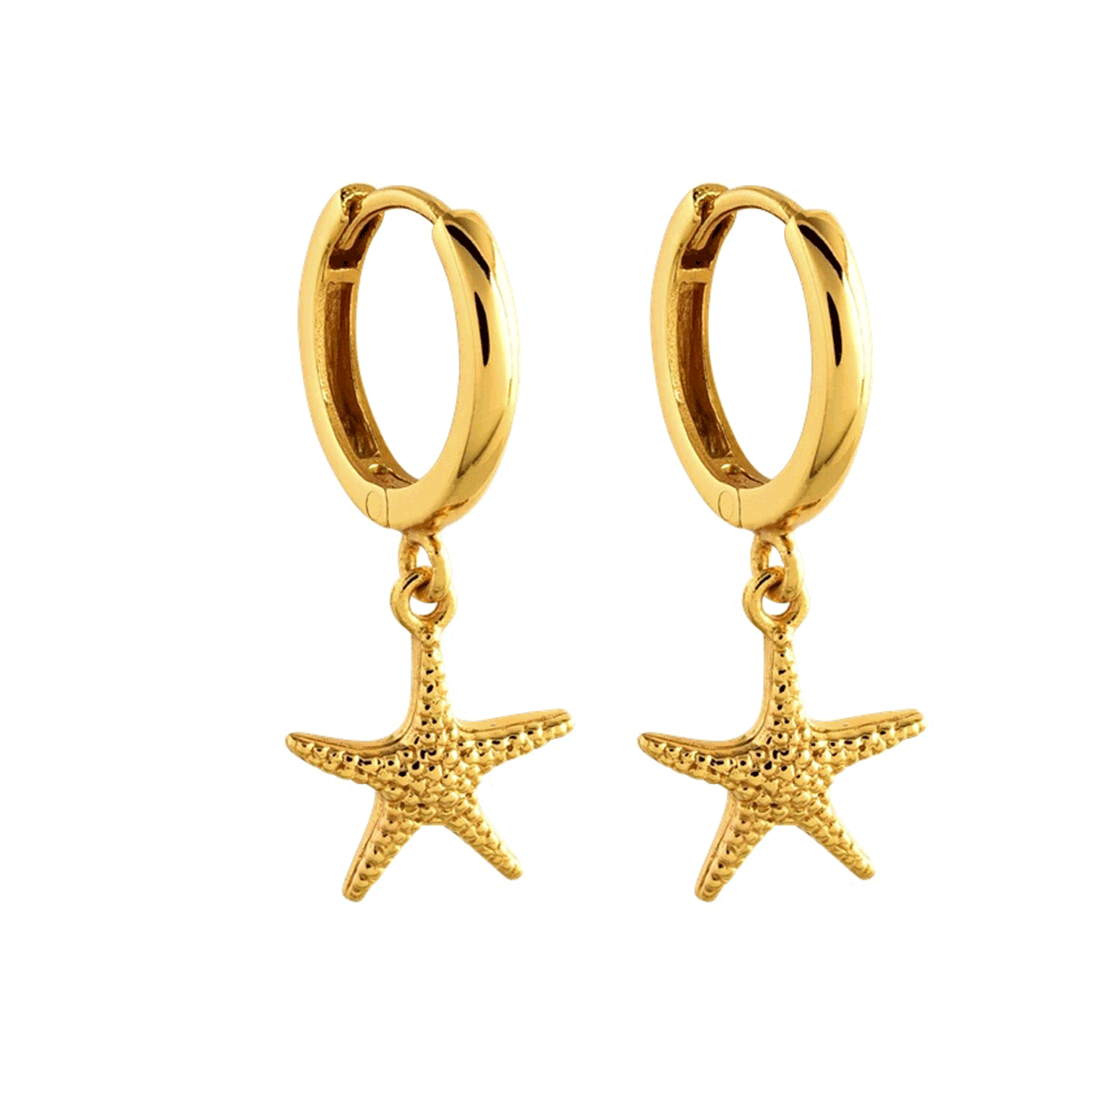 Golden Sea Star Earrings Atelier Astrid & Antoinette close up front view